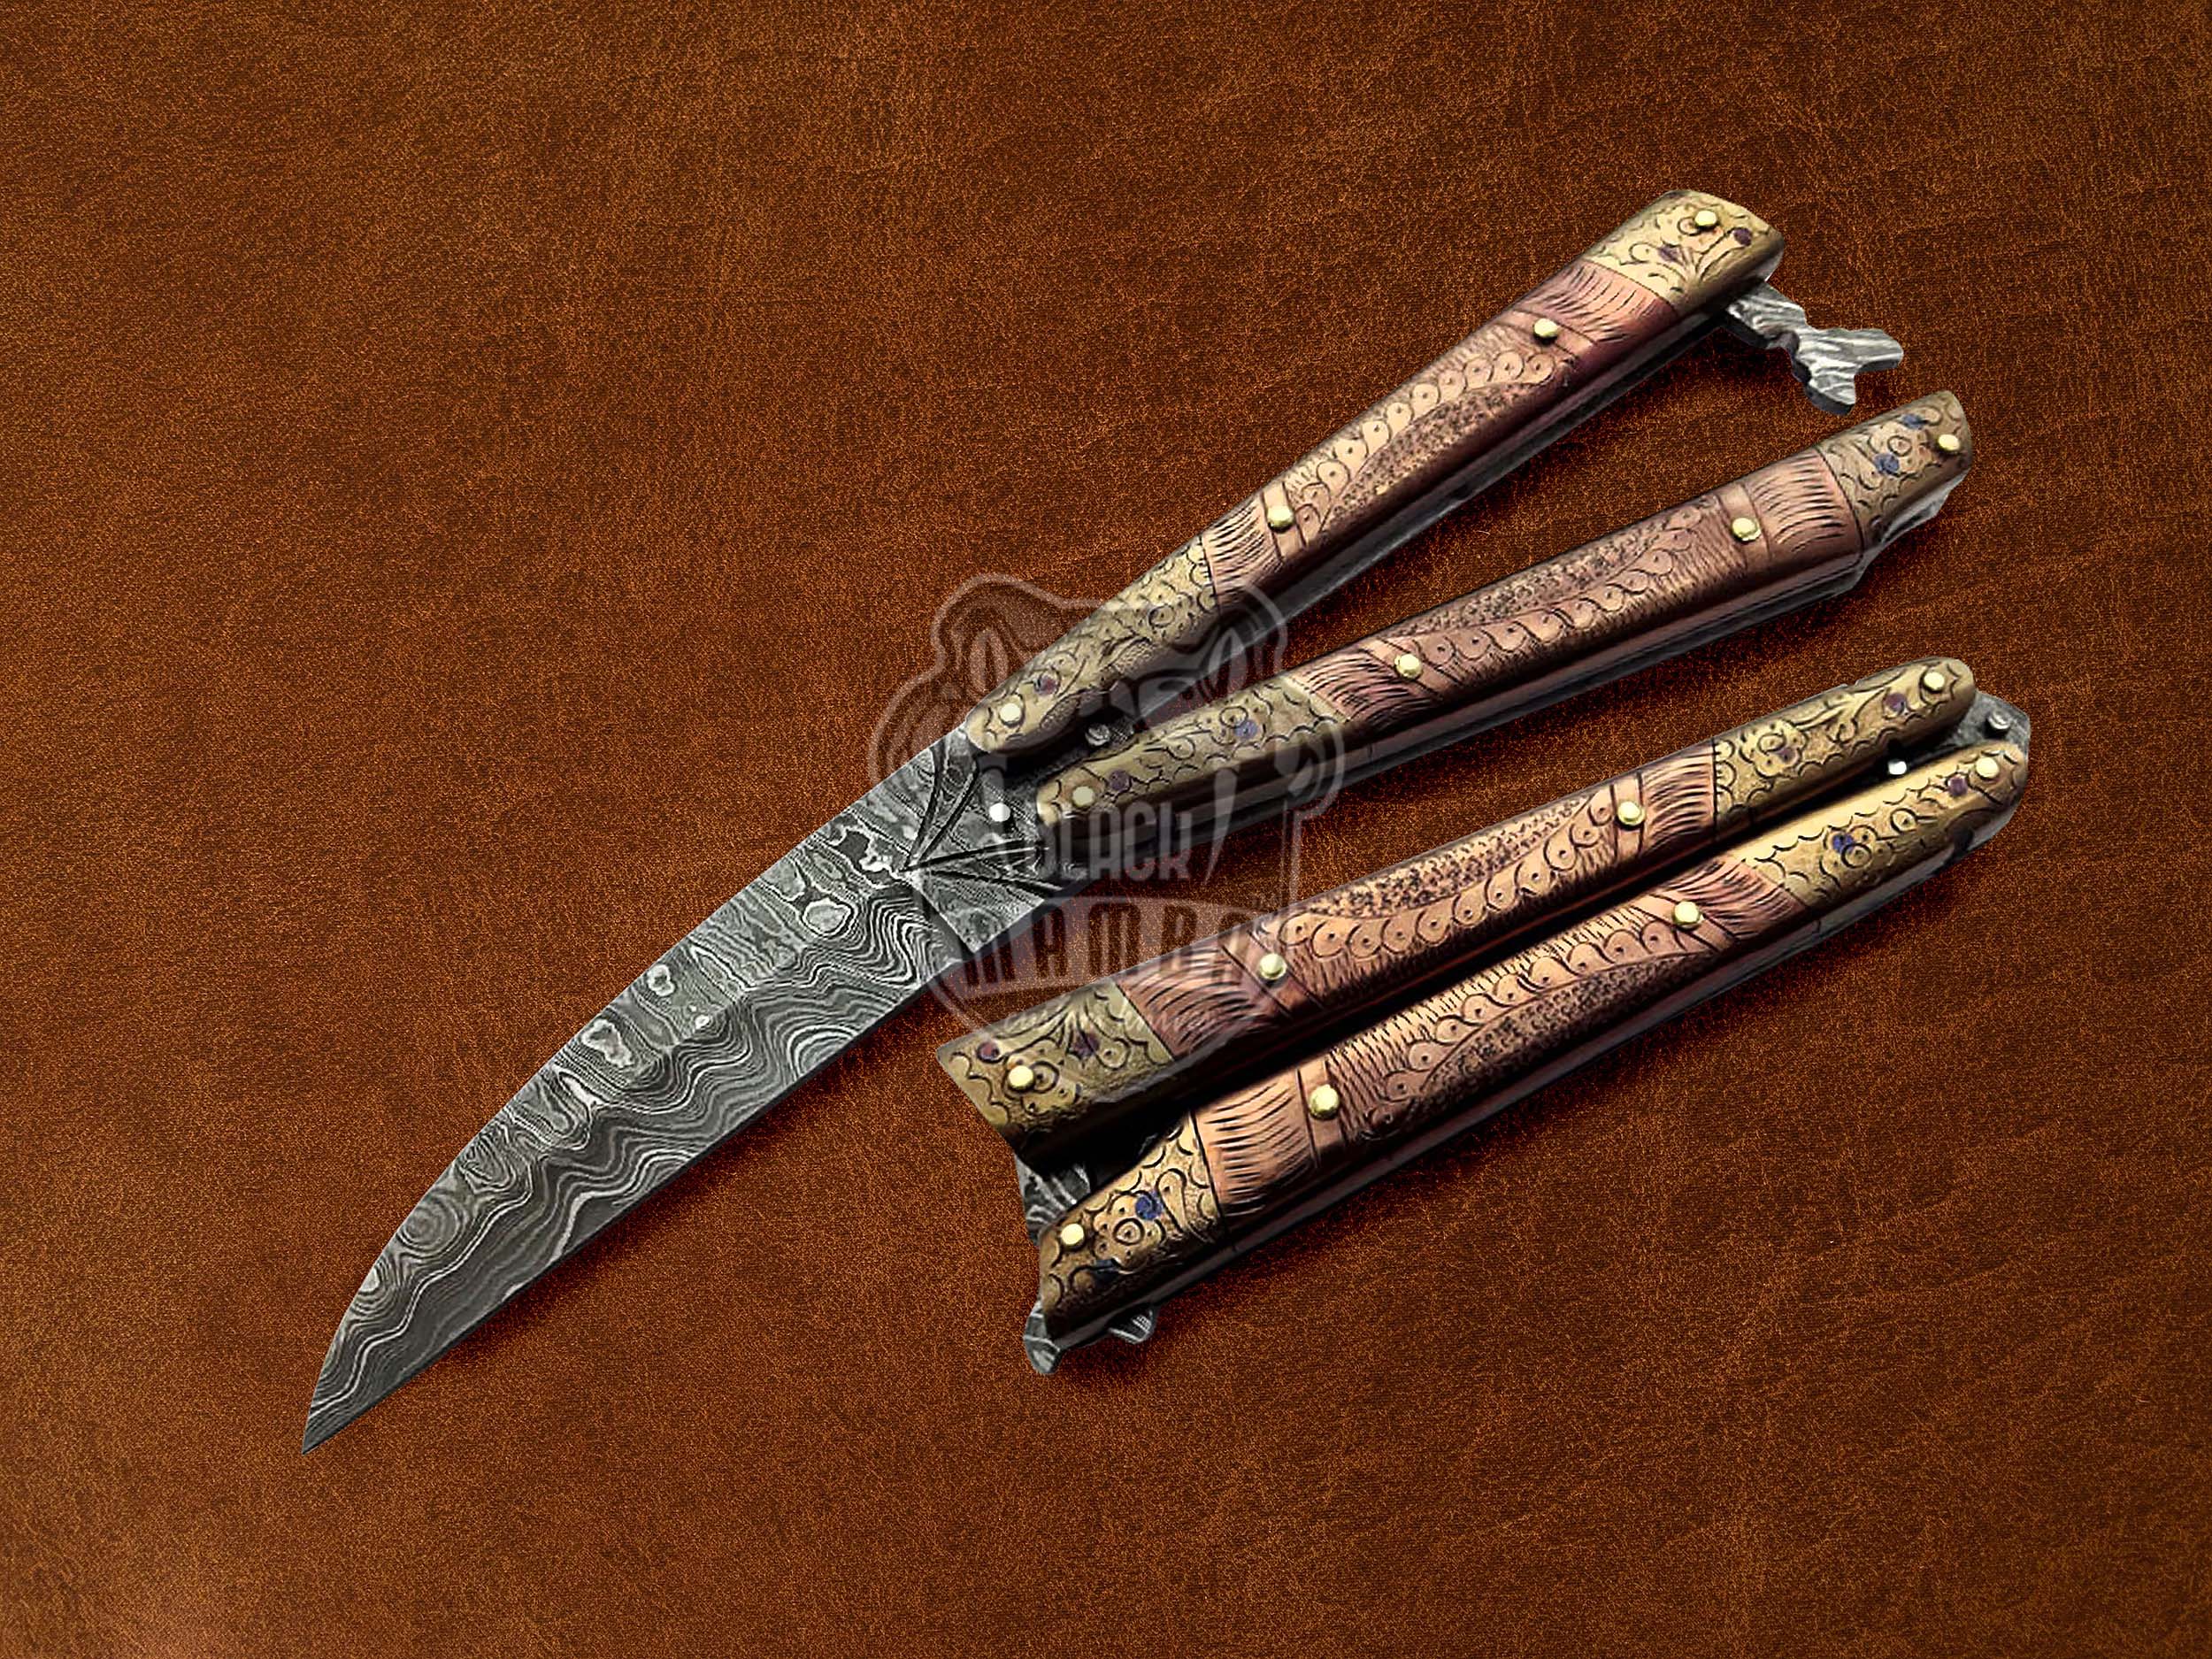 BMK-584 Damascus Balisong Butterfly Knife Copper With Brass